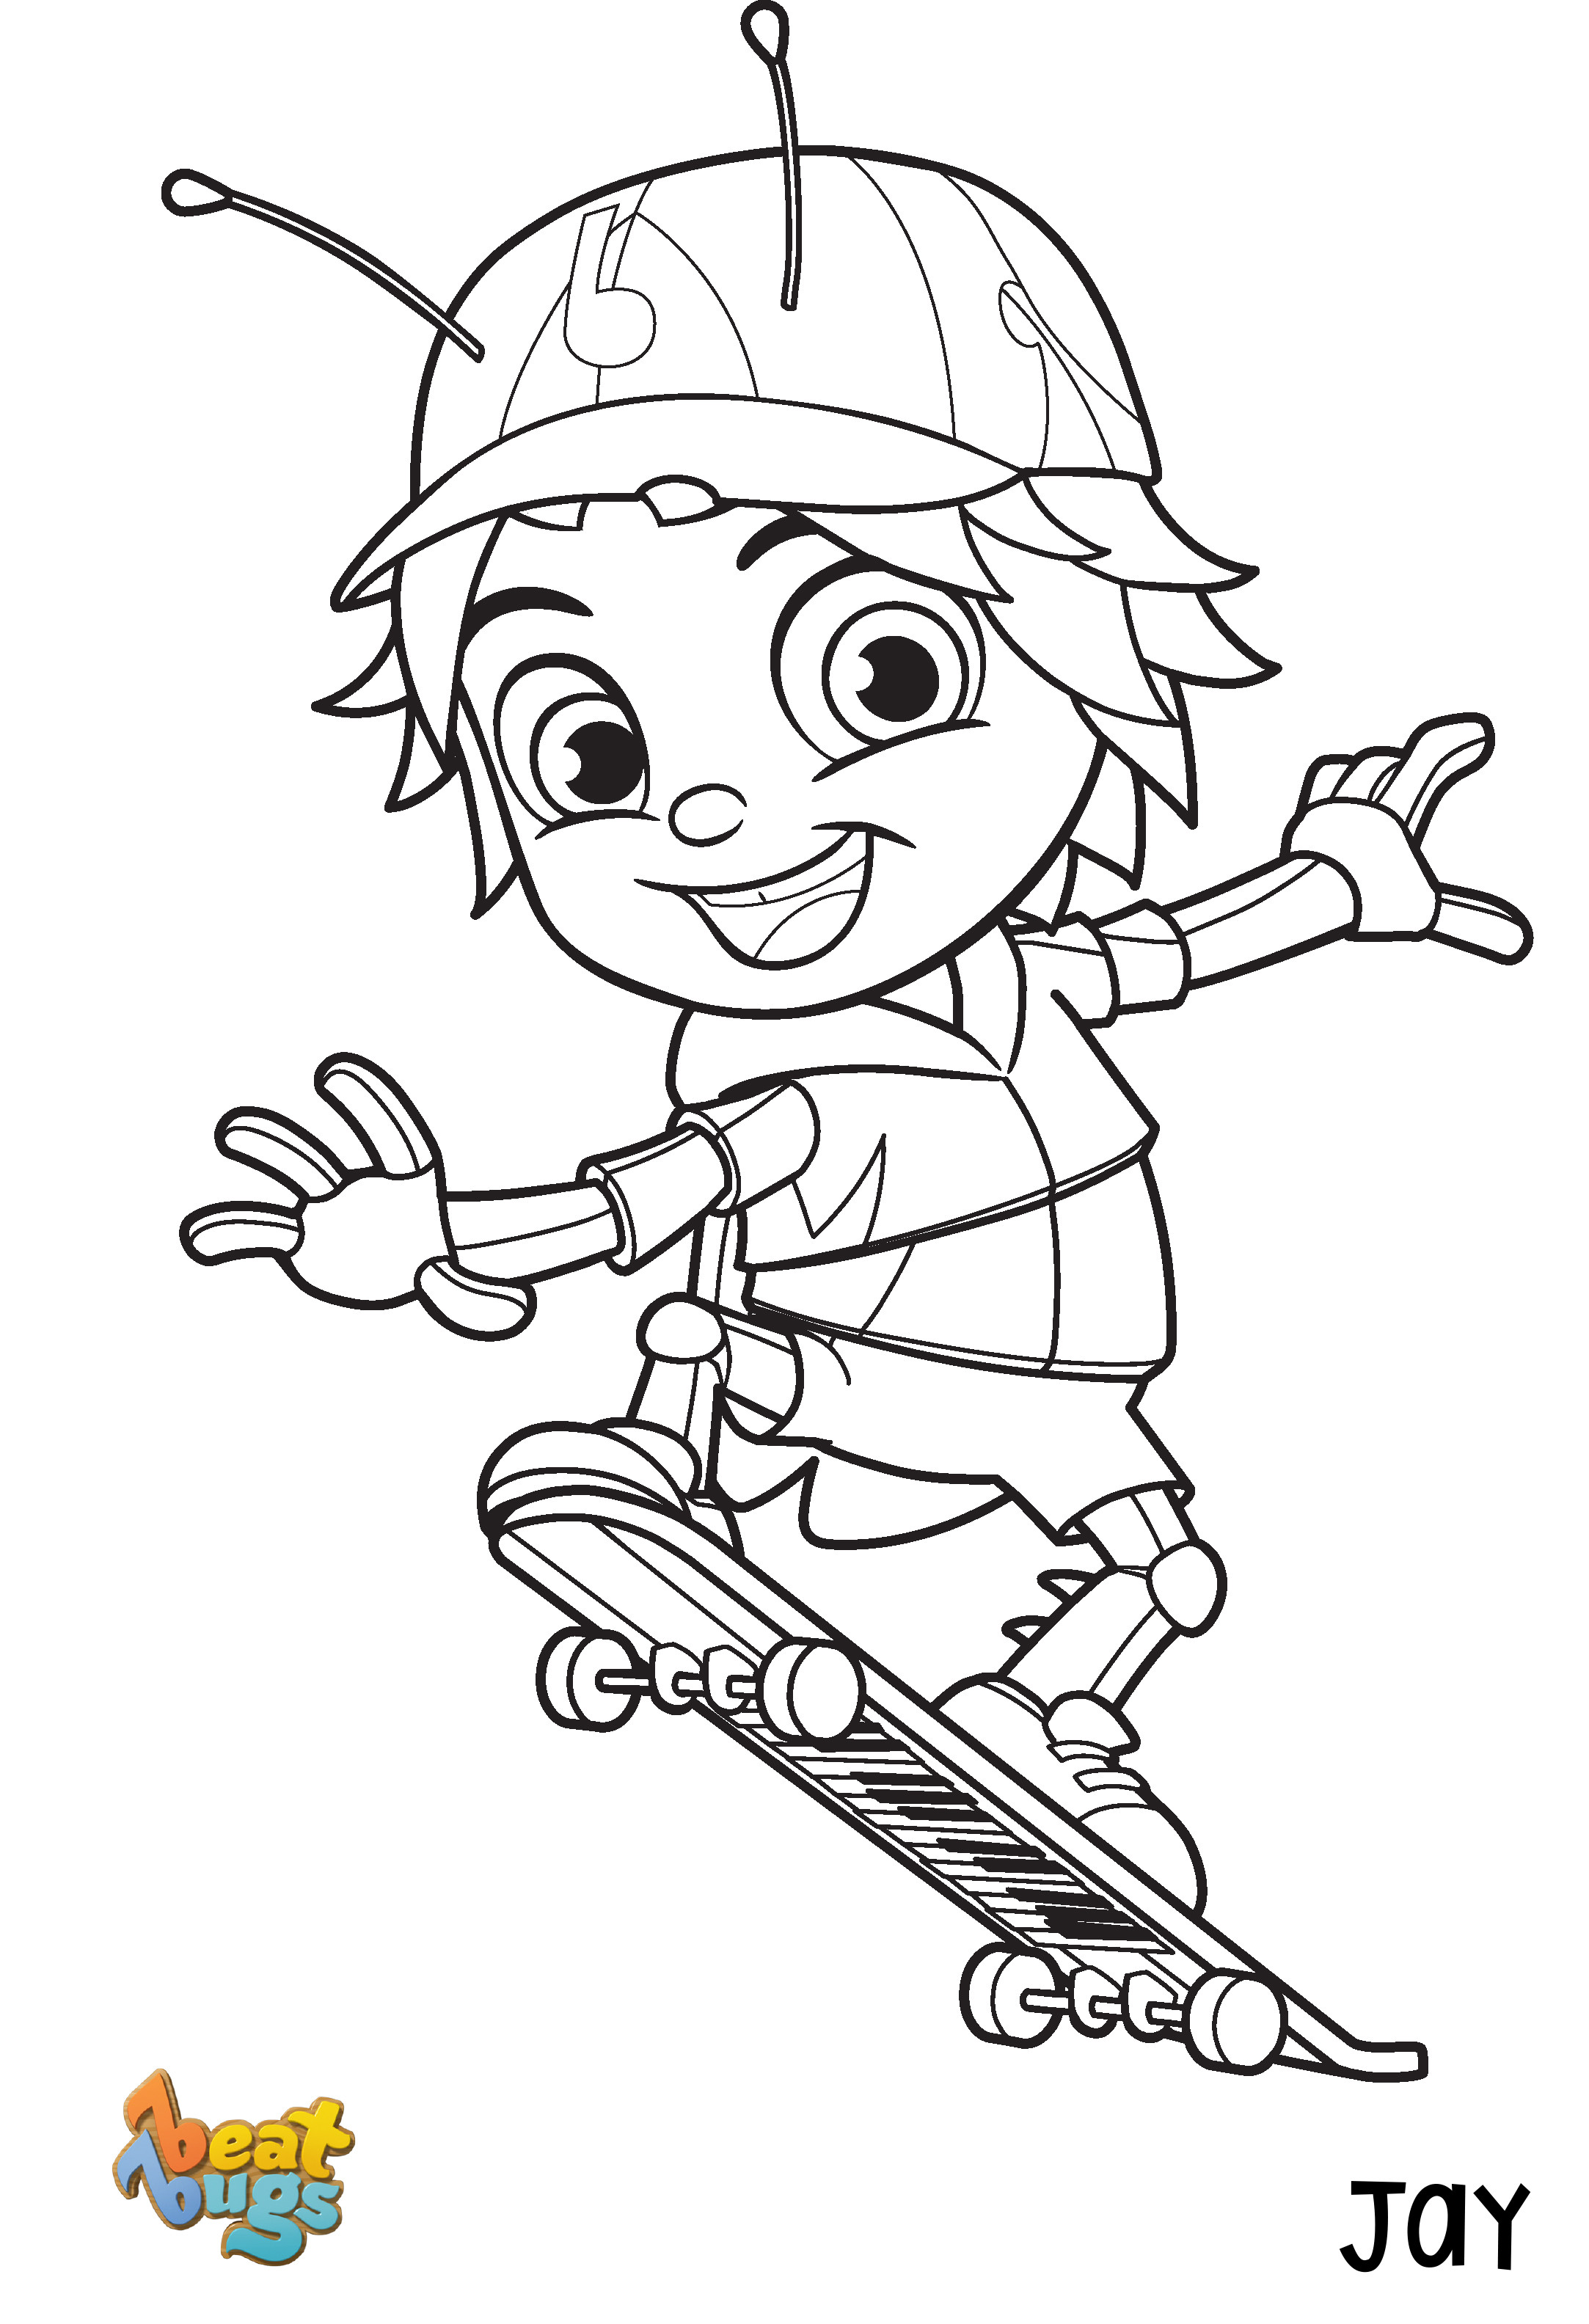 Beat Bugs Coloring Pages
 Crick Coloring Pages